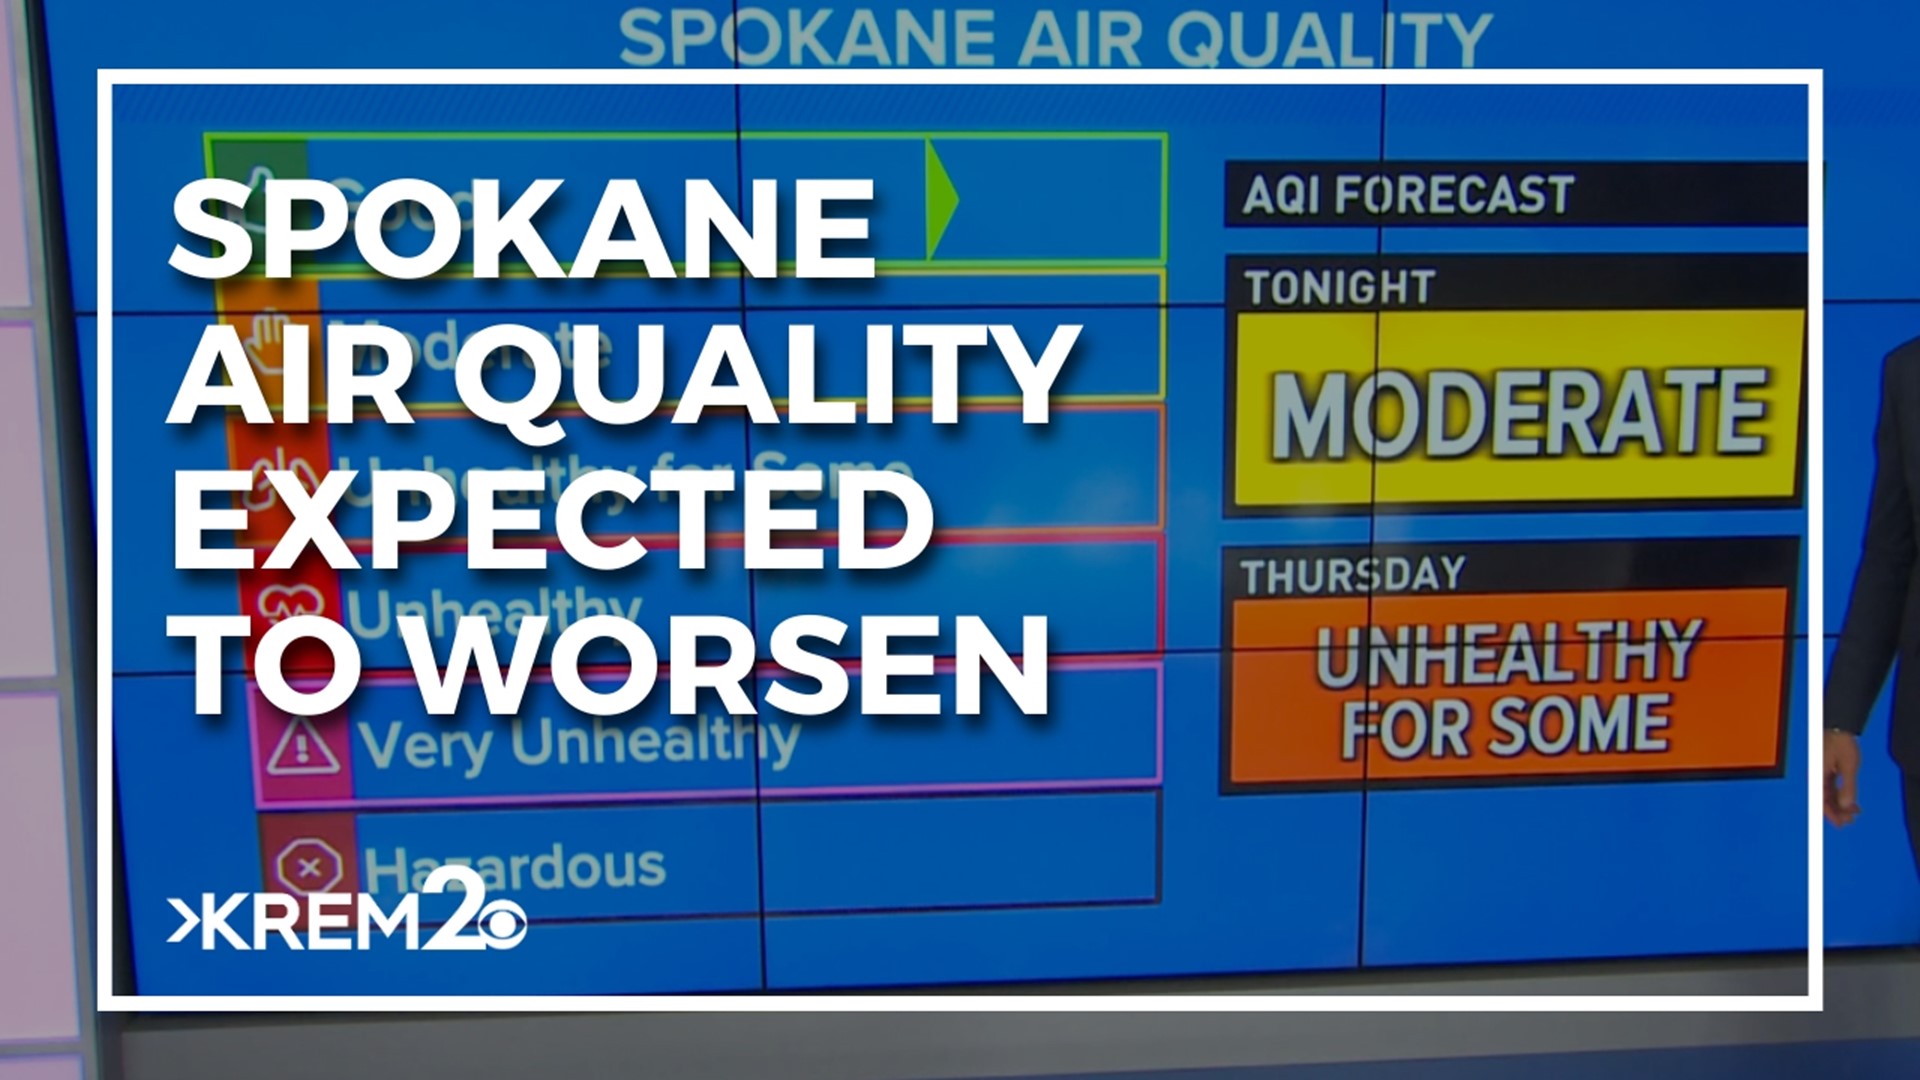 Air quality is expected to worsen in the week of May 17